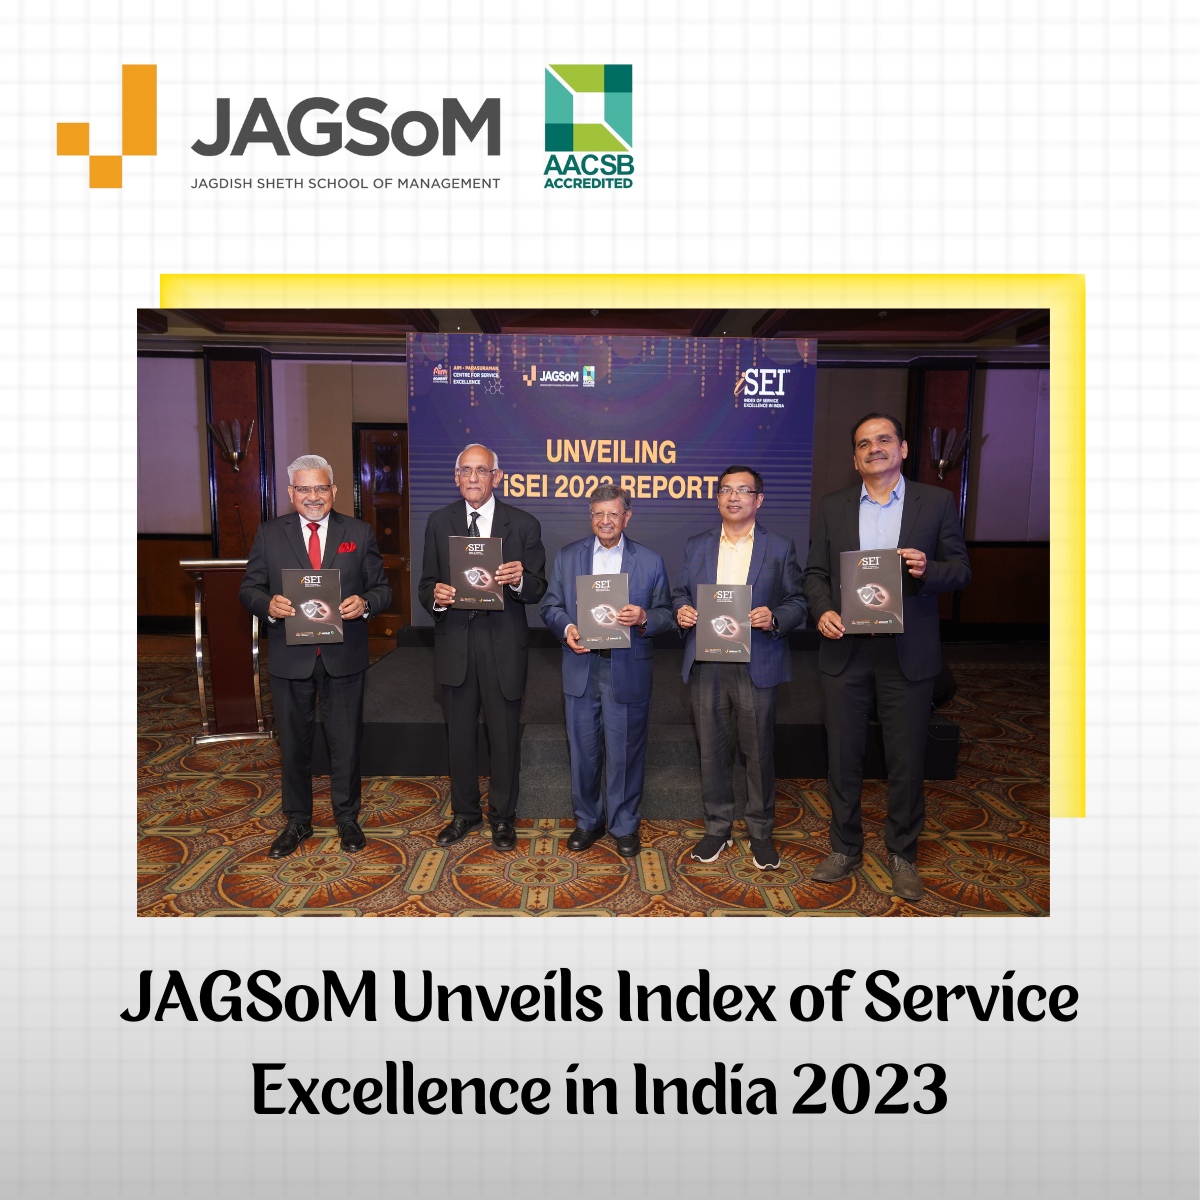 JAGSoM Unveils Index of Service Excellence in India 2023